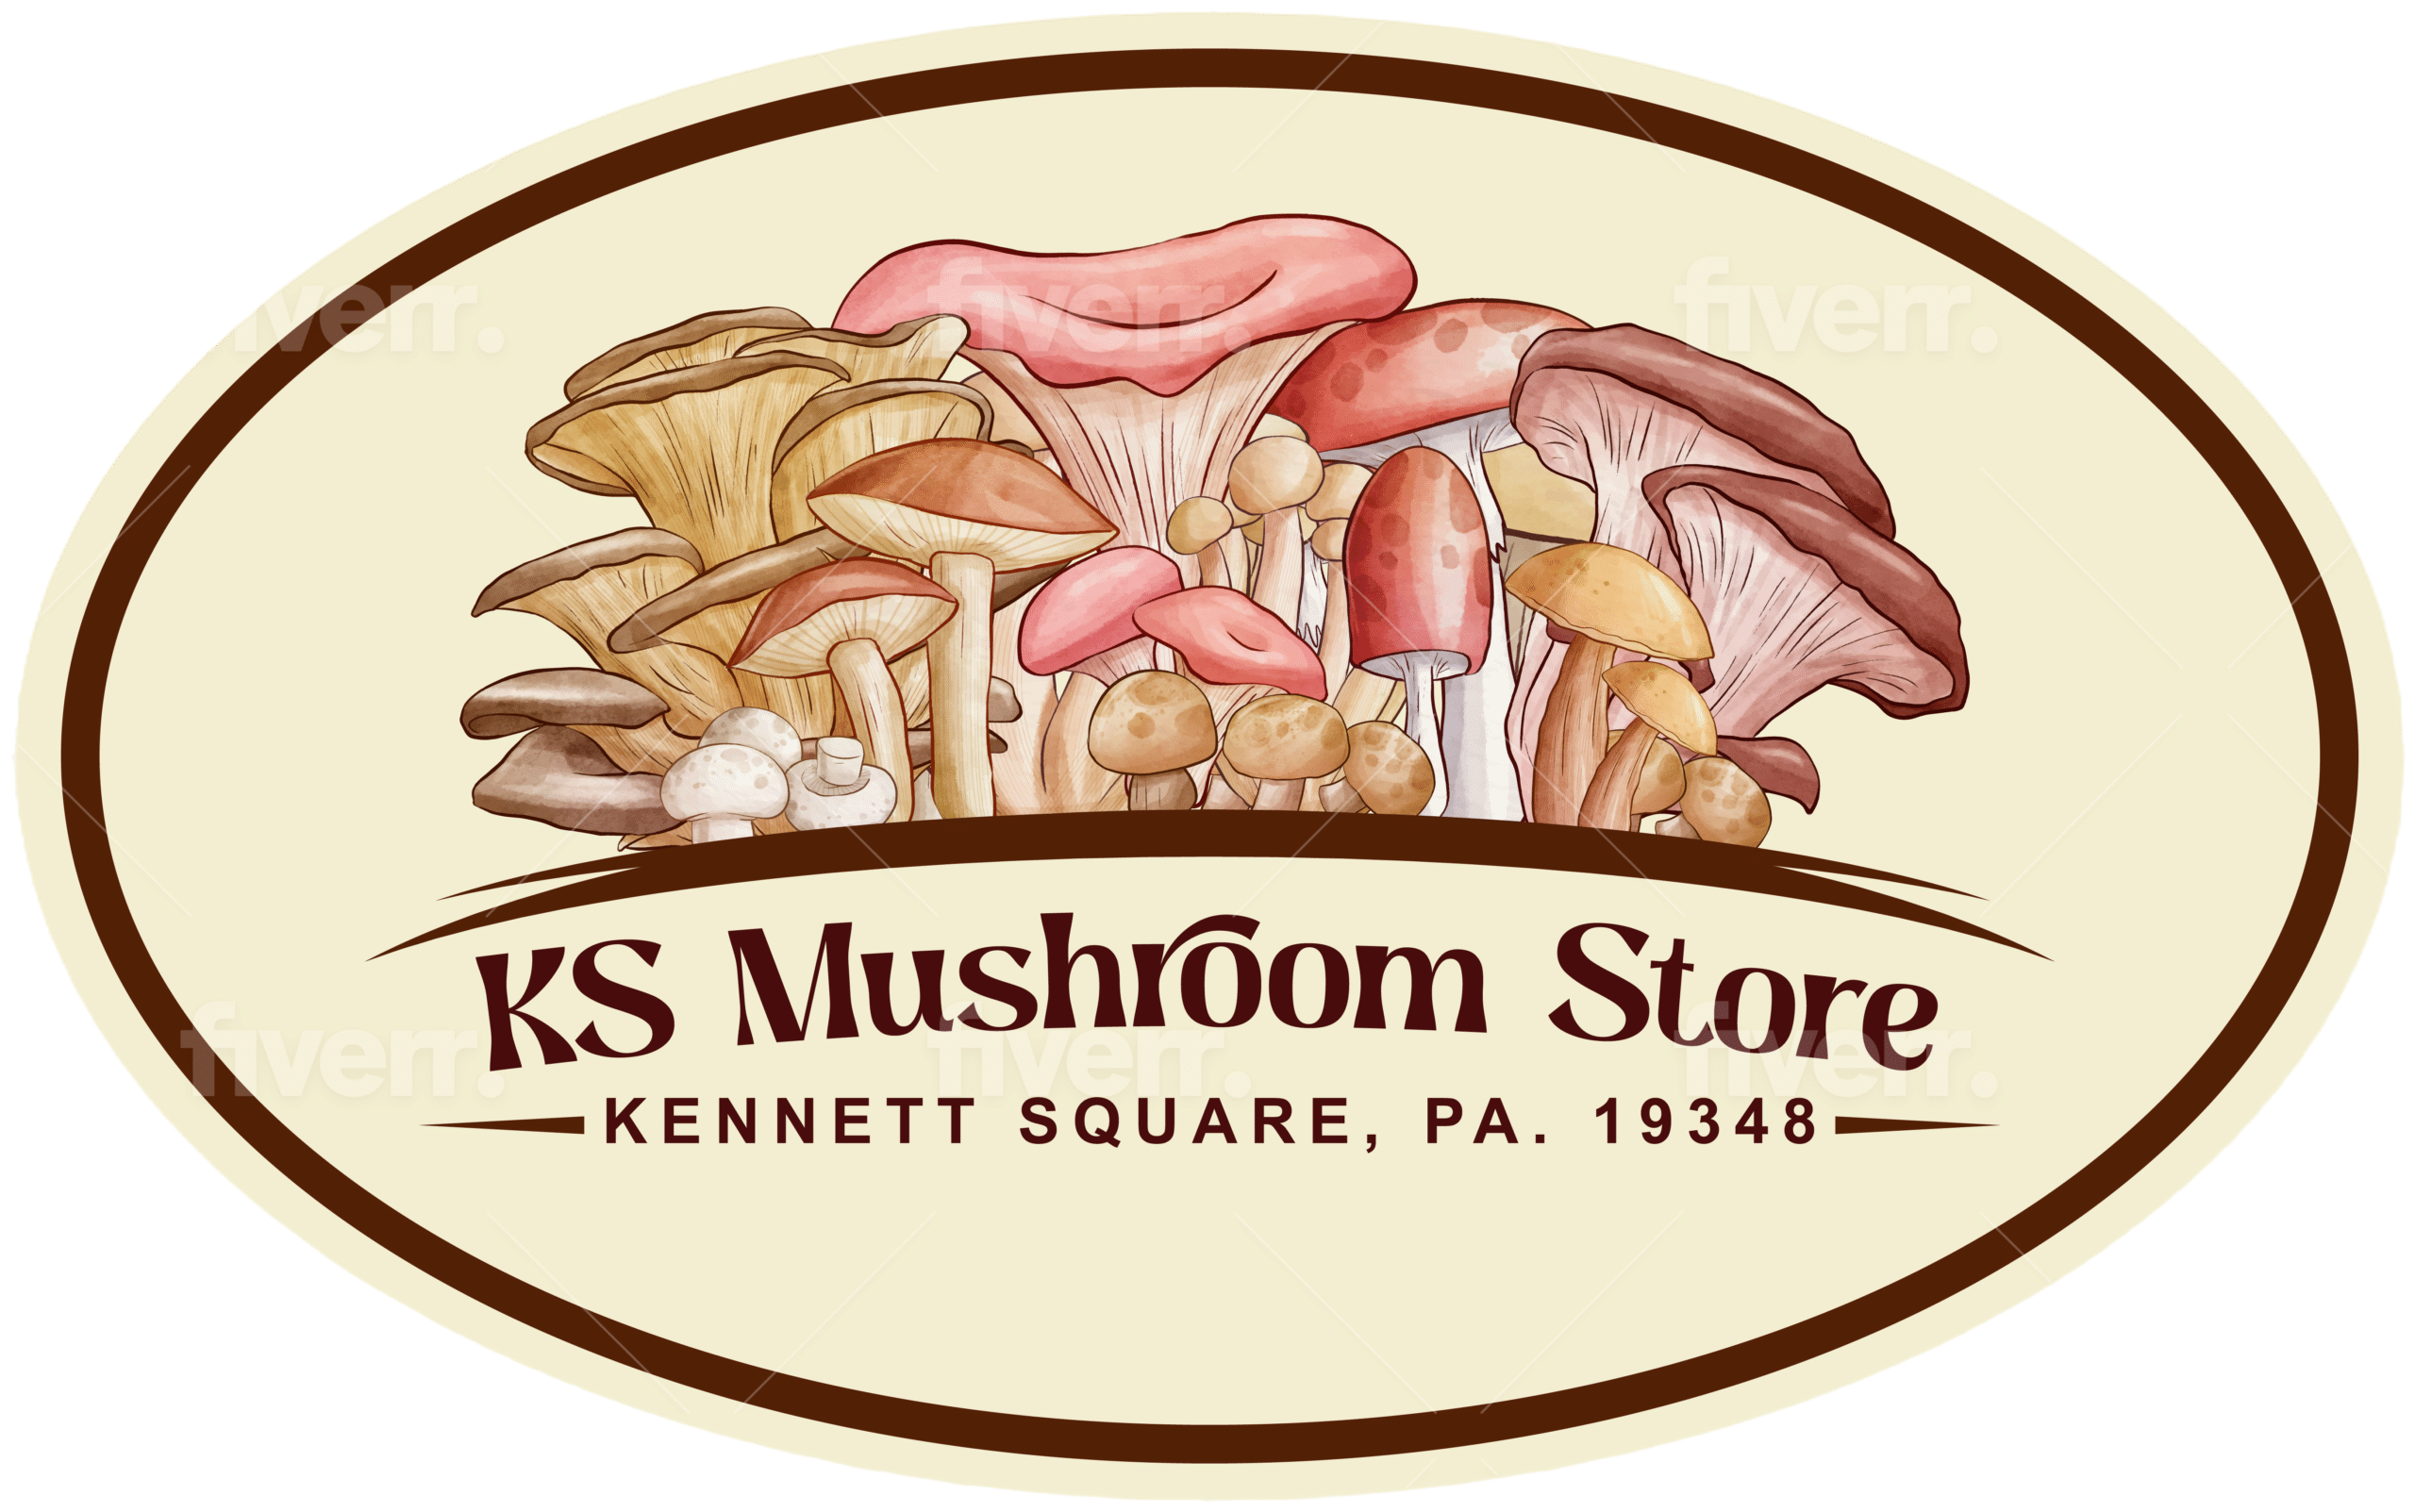 Uncover the Store Mushroom World – Benefits Types Mystical Their and of KS Mushrooms